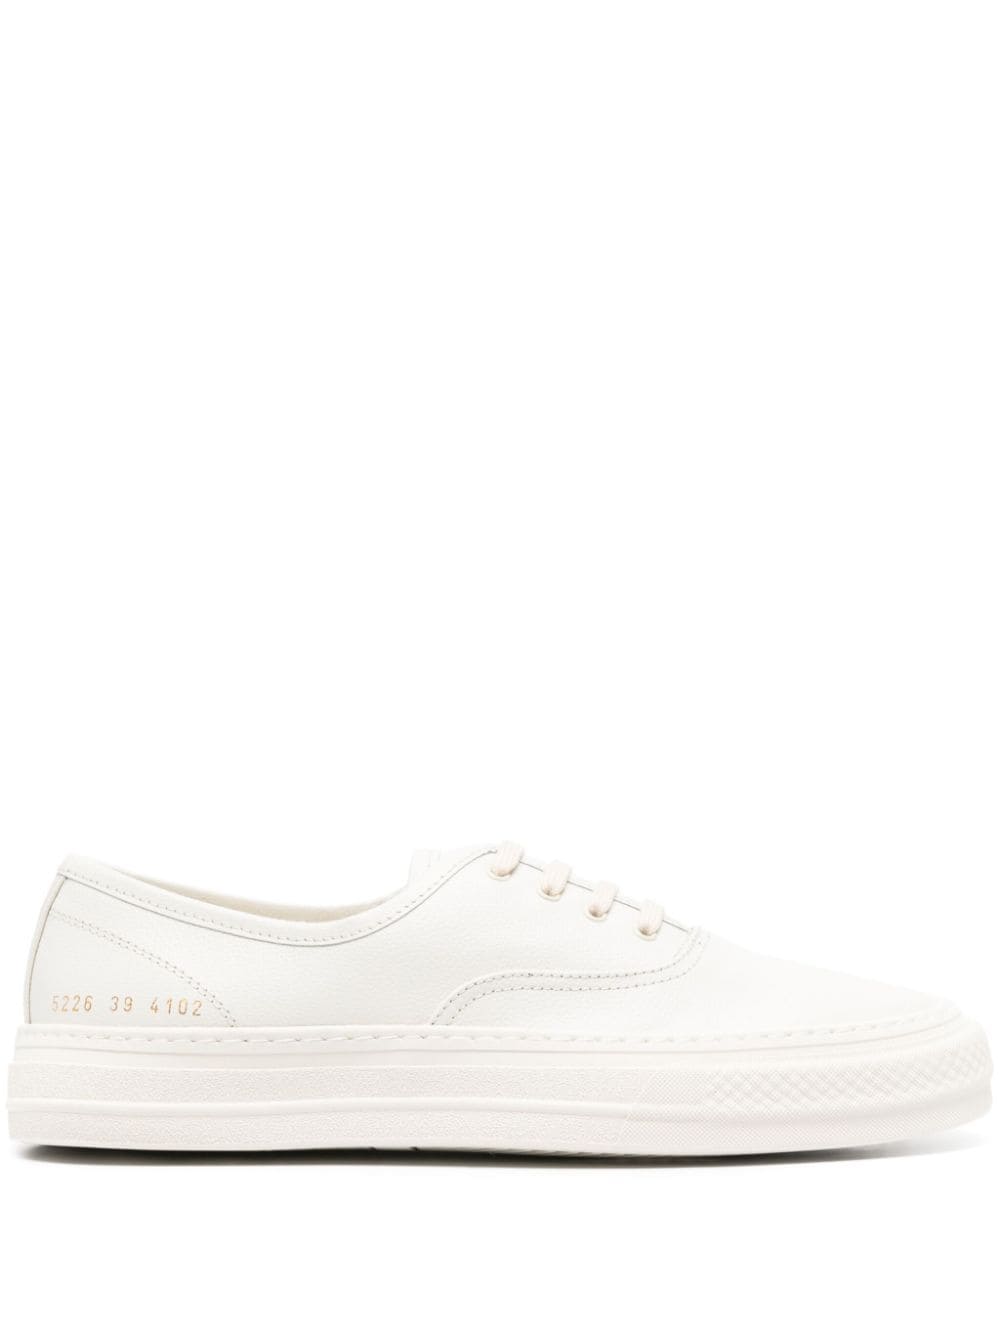 Common Projects logo-print leather sneakers - Nude von Common Projects